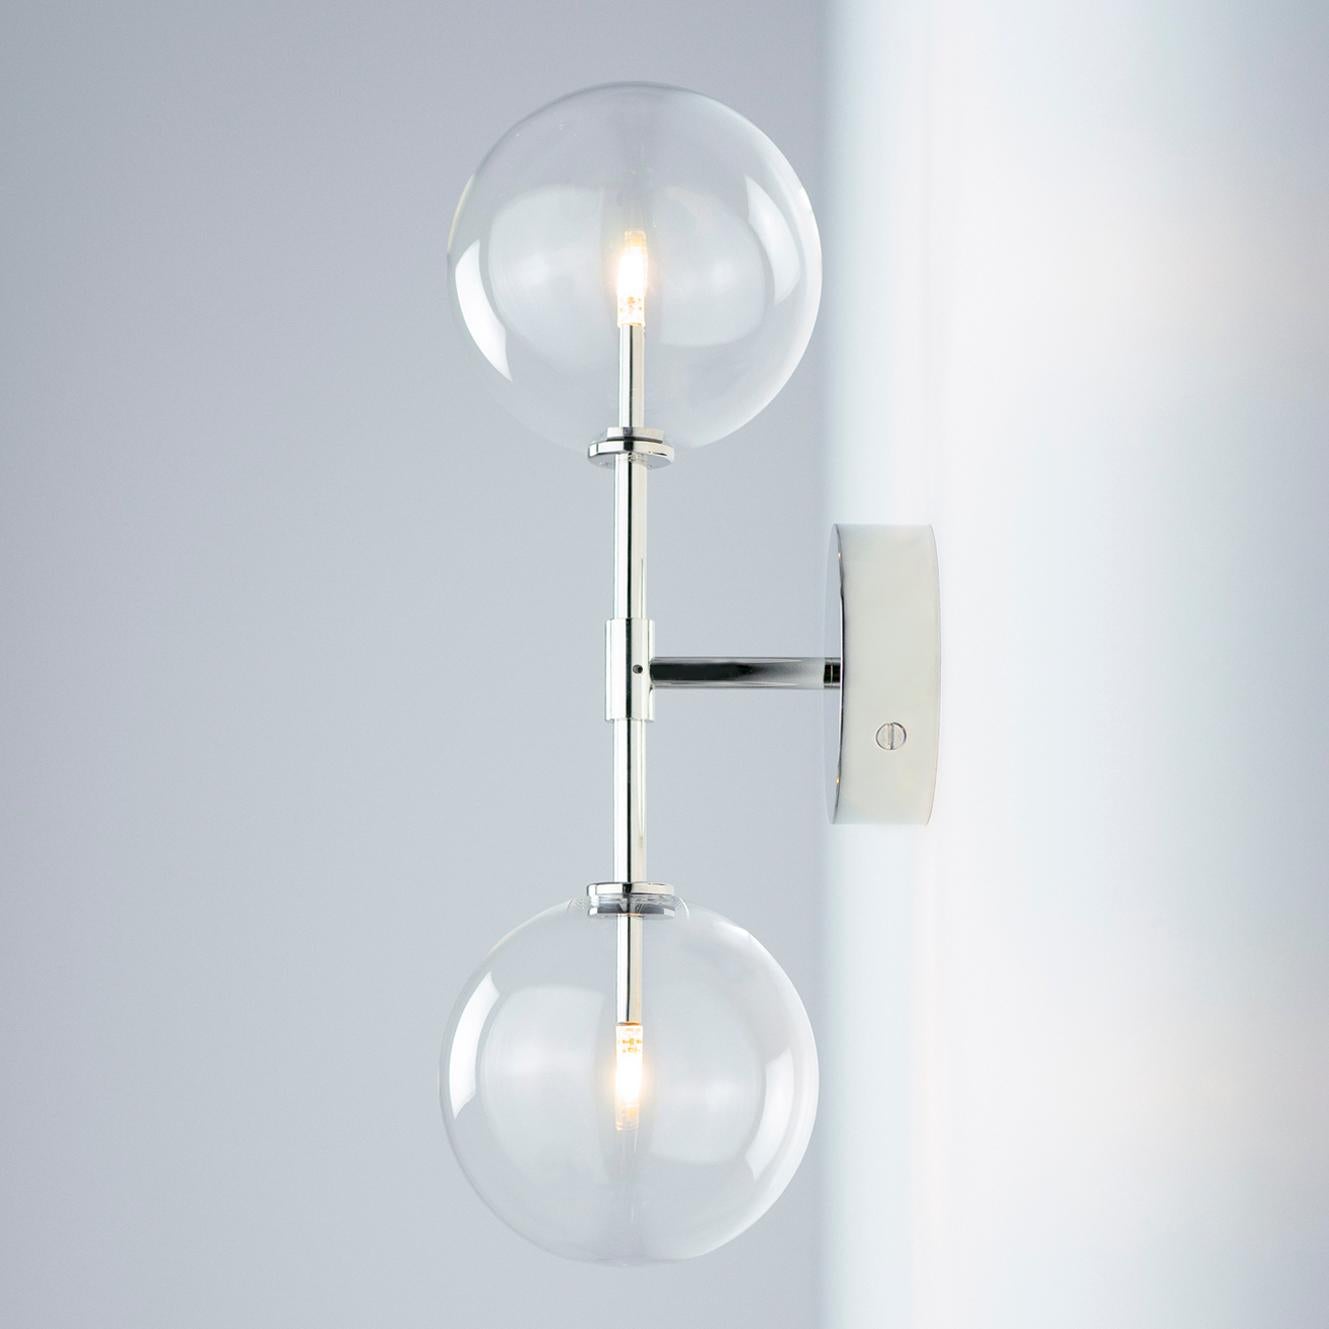 Dawn Dual Wall Sconce by Schwung
Dimensions: W 19 x D 15 x H 47.8 cm
Materials: Polished Nickel, hand blown glass globes

Finishes available: Black gunmetal, polished nickel and brass
Other sizes available.

Schwung is a German word, and loosely